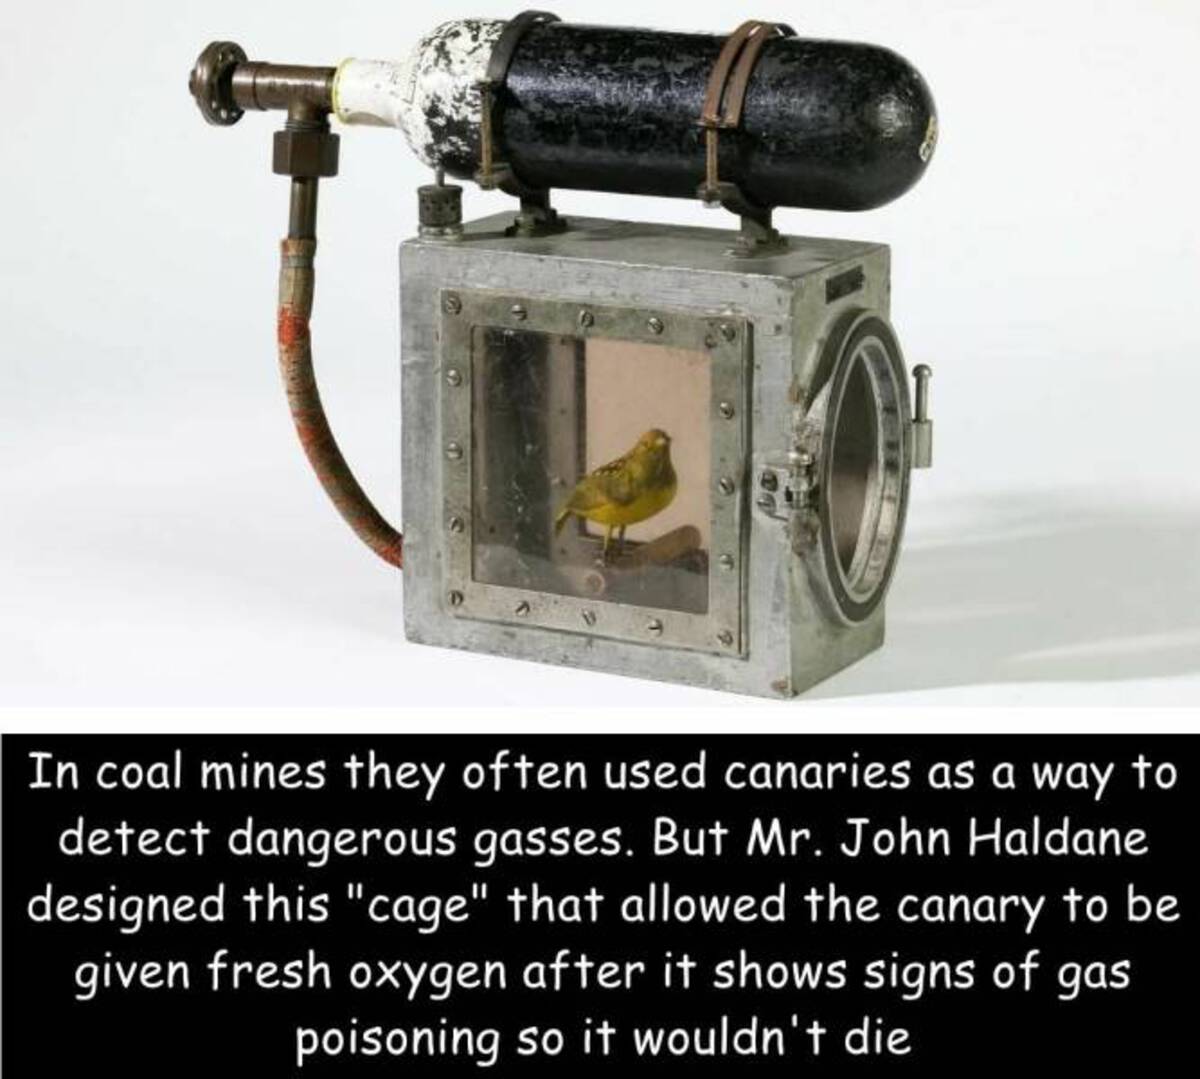 canary space suit - In coal mines they often used canaries as a way to detect dangerous gasses. But Mr. John Haldane designed this "cage" that allowed the canary to be given fresh oxygen after it shows signs of gas poisoning so it wouldn't die